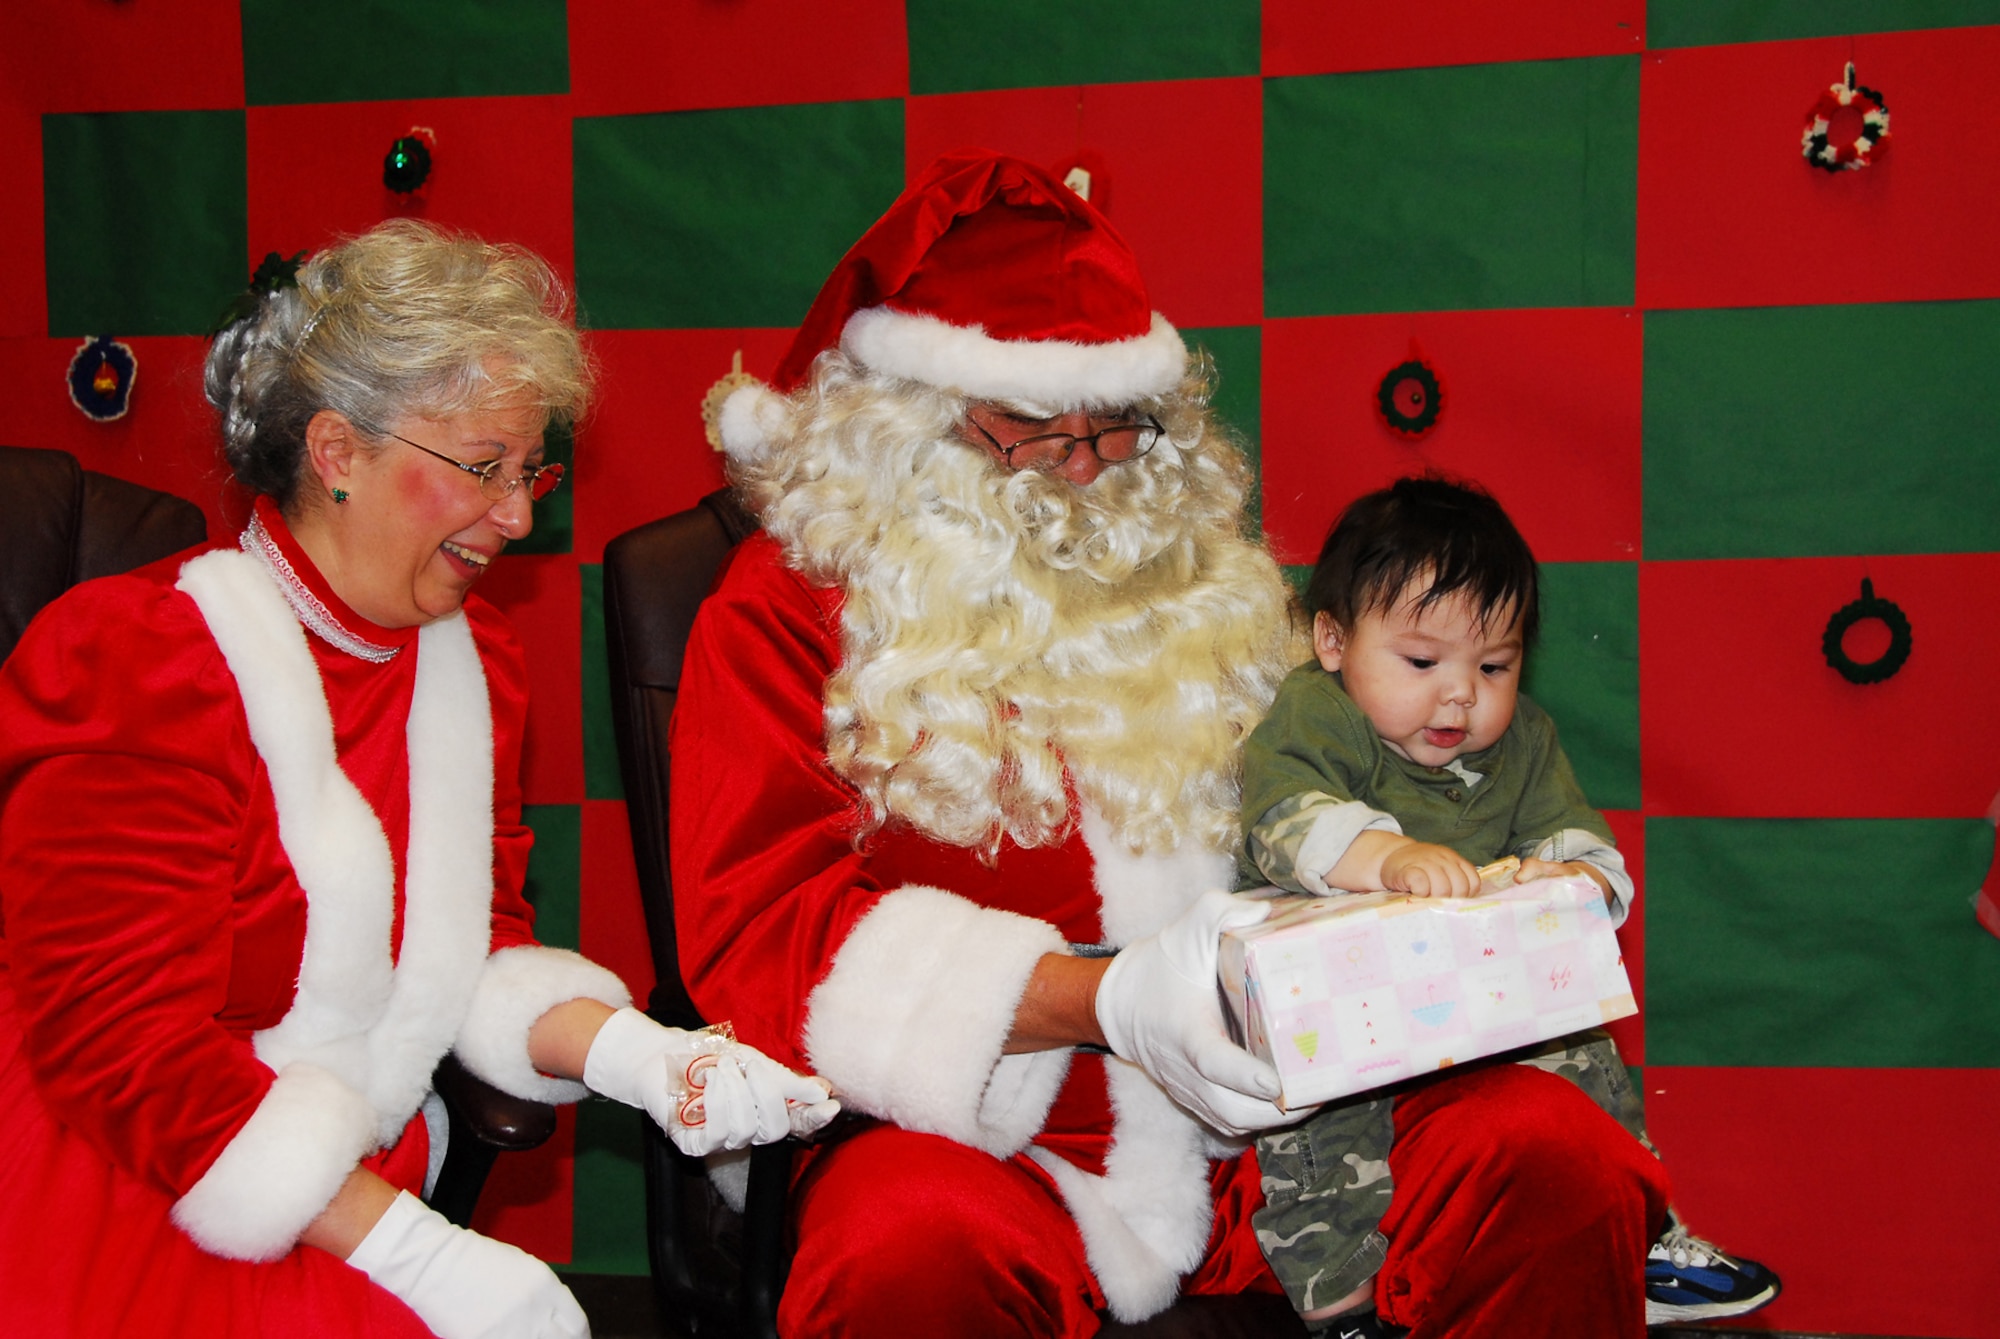 RUBY, Alaska -- Santa and Mrs. Claus deliver the first present to Levi Williams during the Alaska National Guard's Operation Santa Claus Nov. 5. Ruby was the first village Operation Santa Claus, which is celebrating its 52nd anniversary, visited this year. This event is part of the Alaska National Guard's yearly community relations and support program that provides clothing, books, school supplies and toys for youngsters in communities across the state each year during the holidays. (U.S. Army photo/Kalei Brooks)